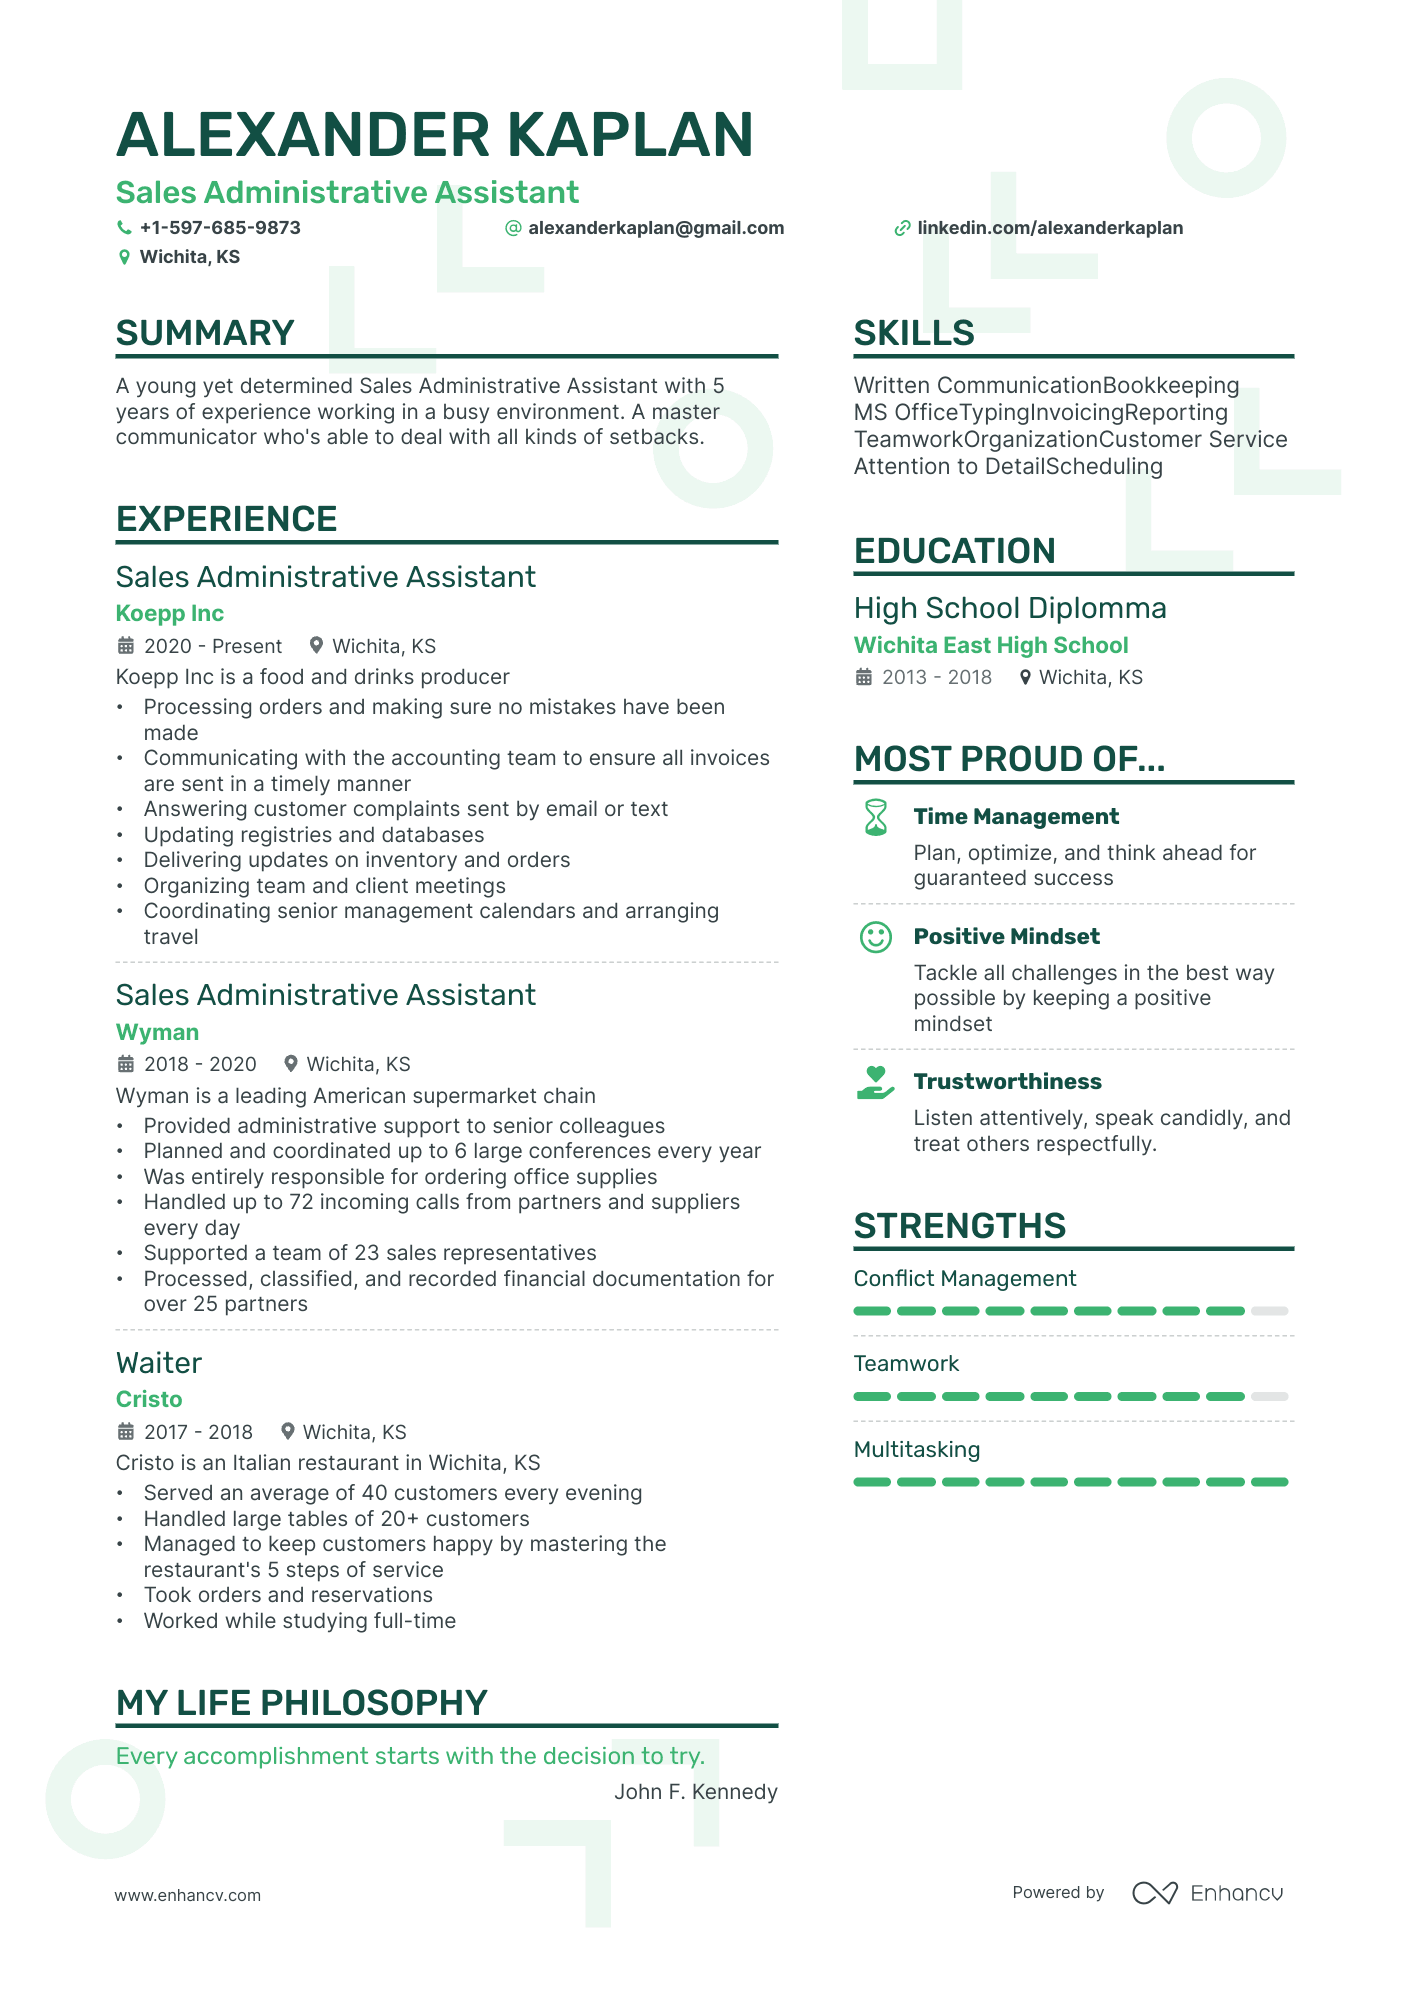 Sales Administrative Assistant resume example